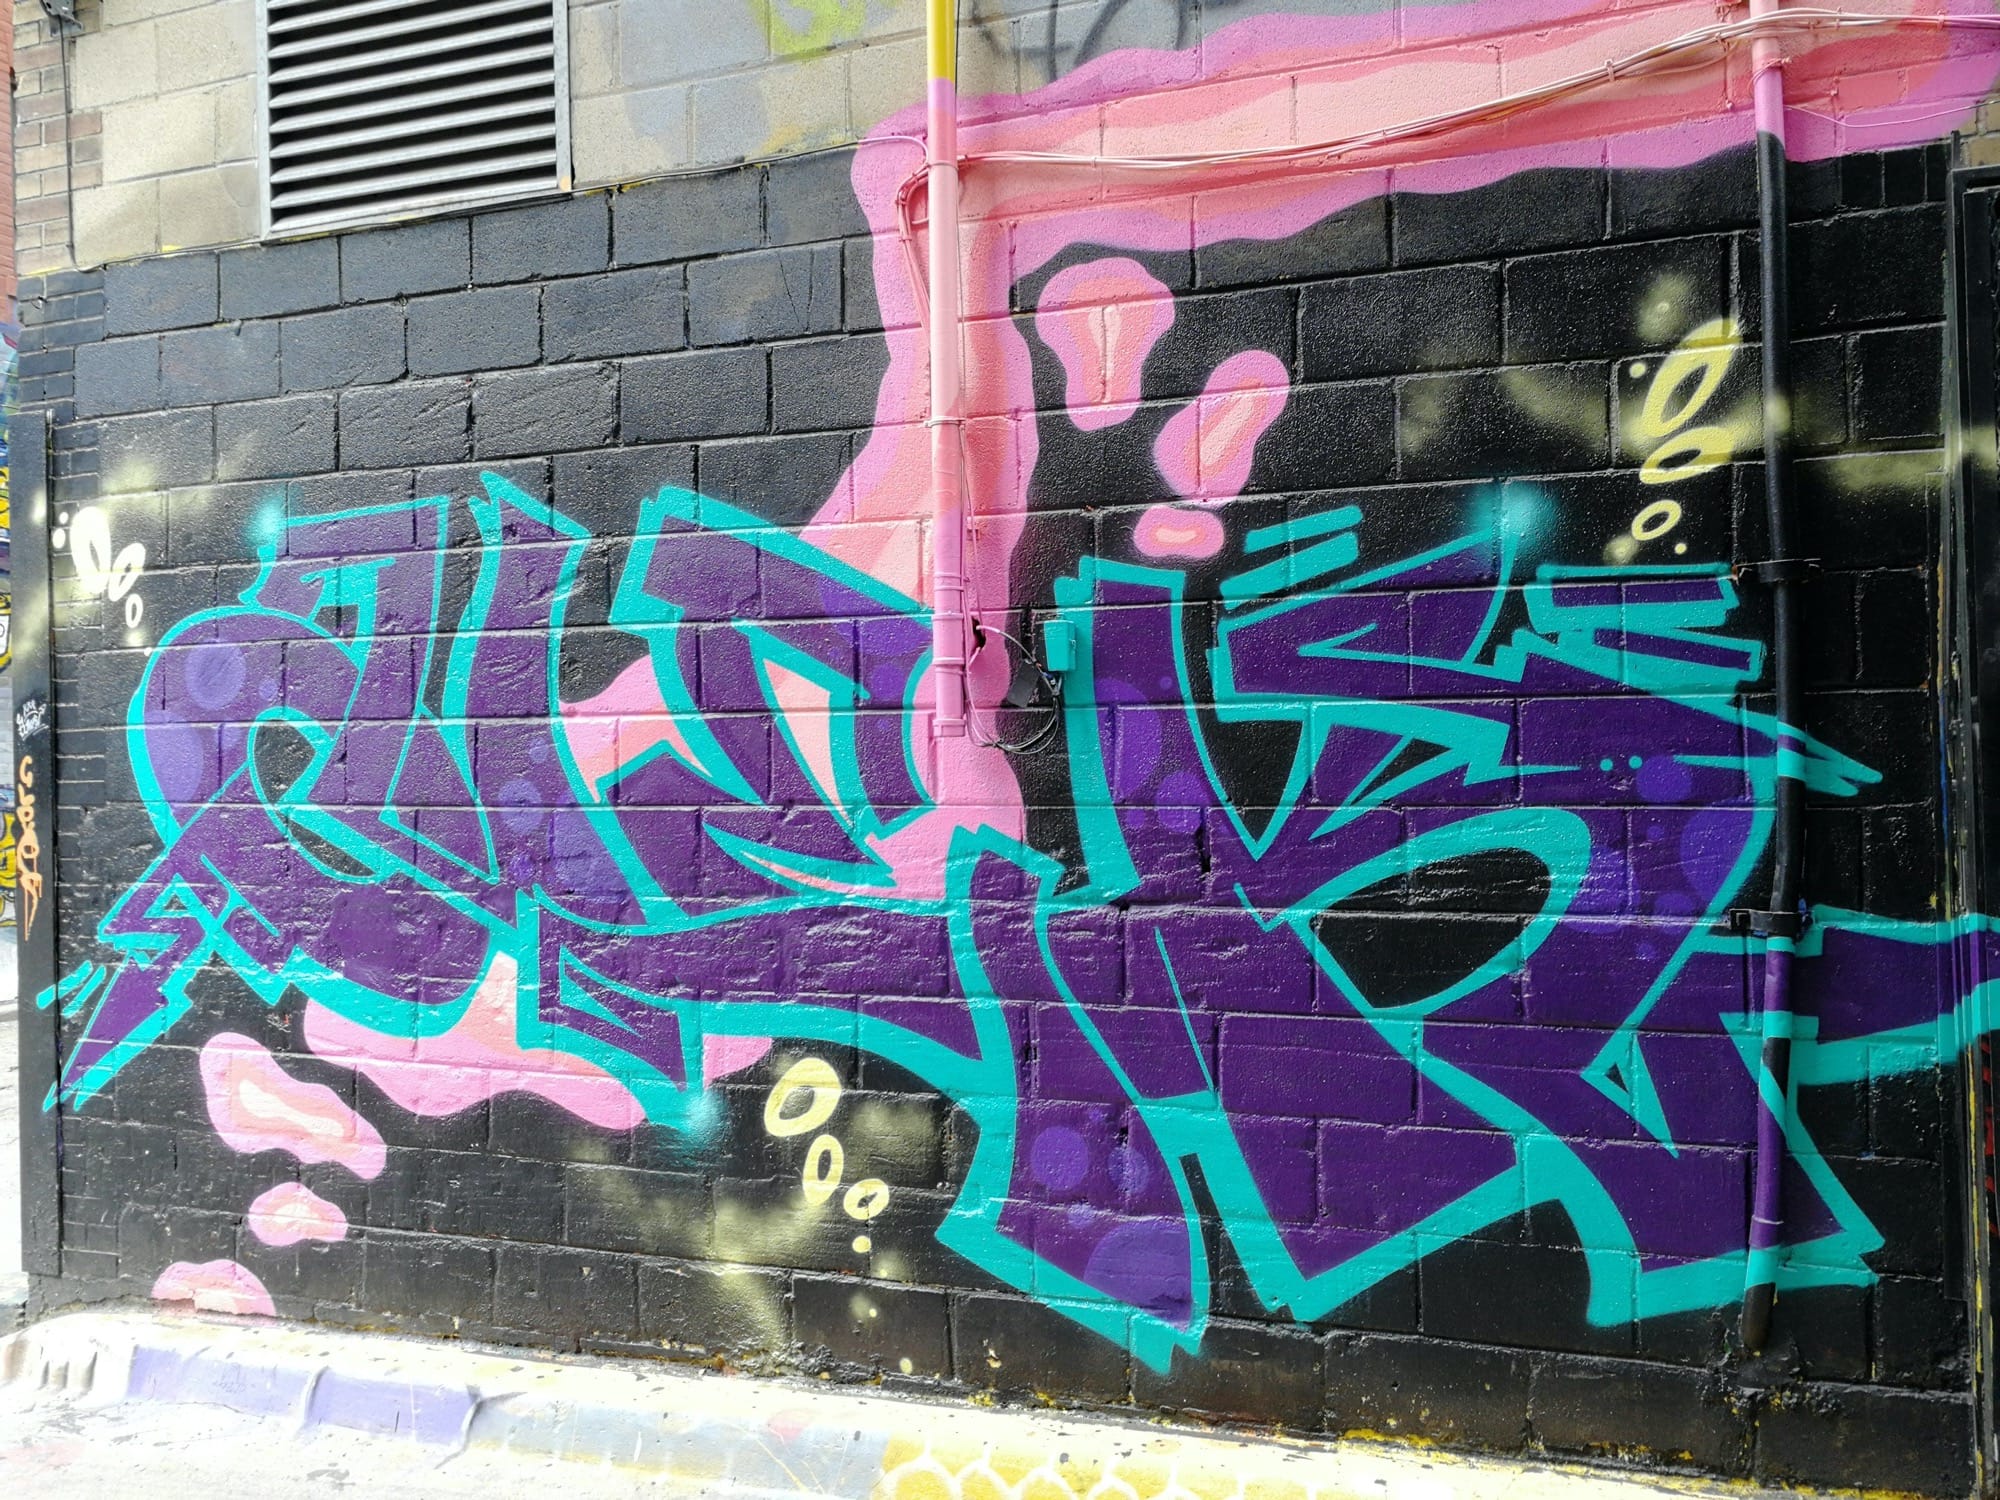 Graffiti 2571  captured by Rabot in Toronto Canada